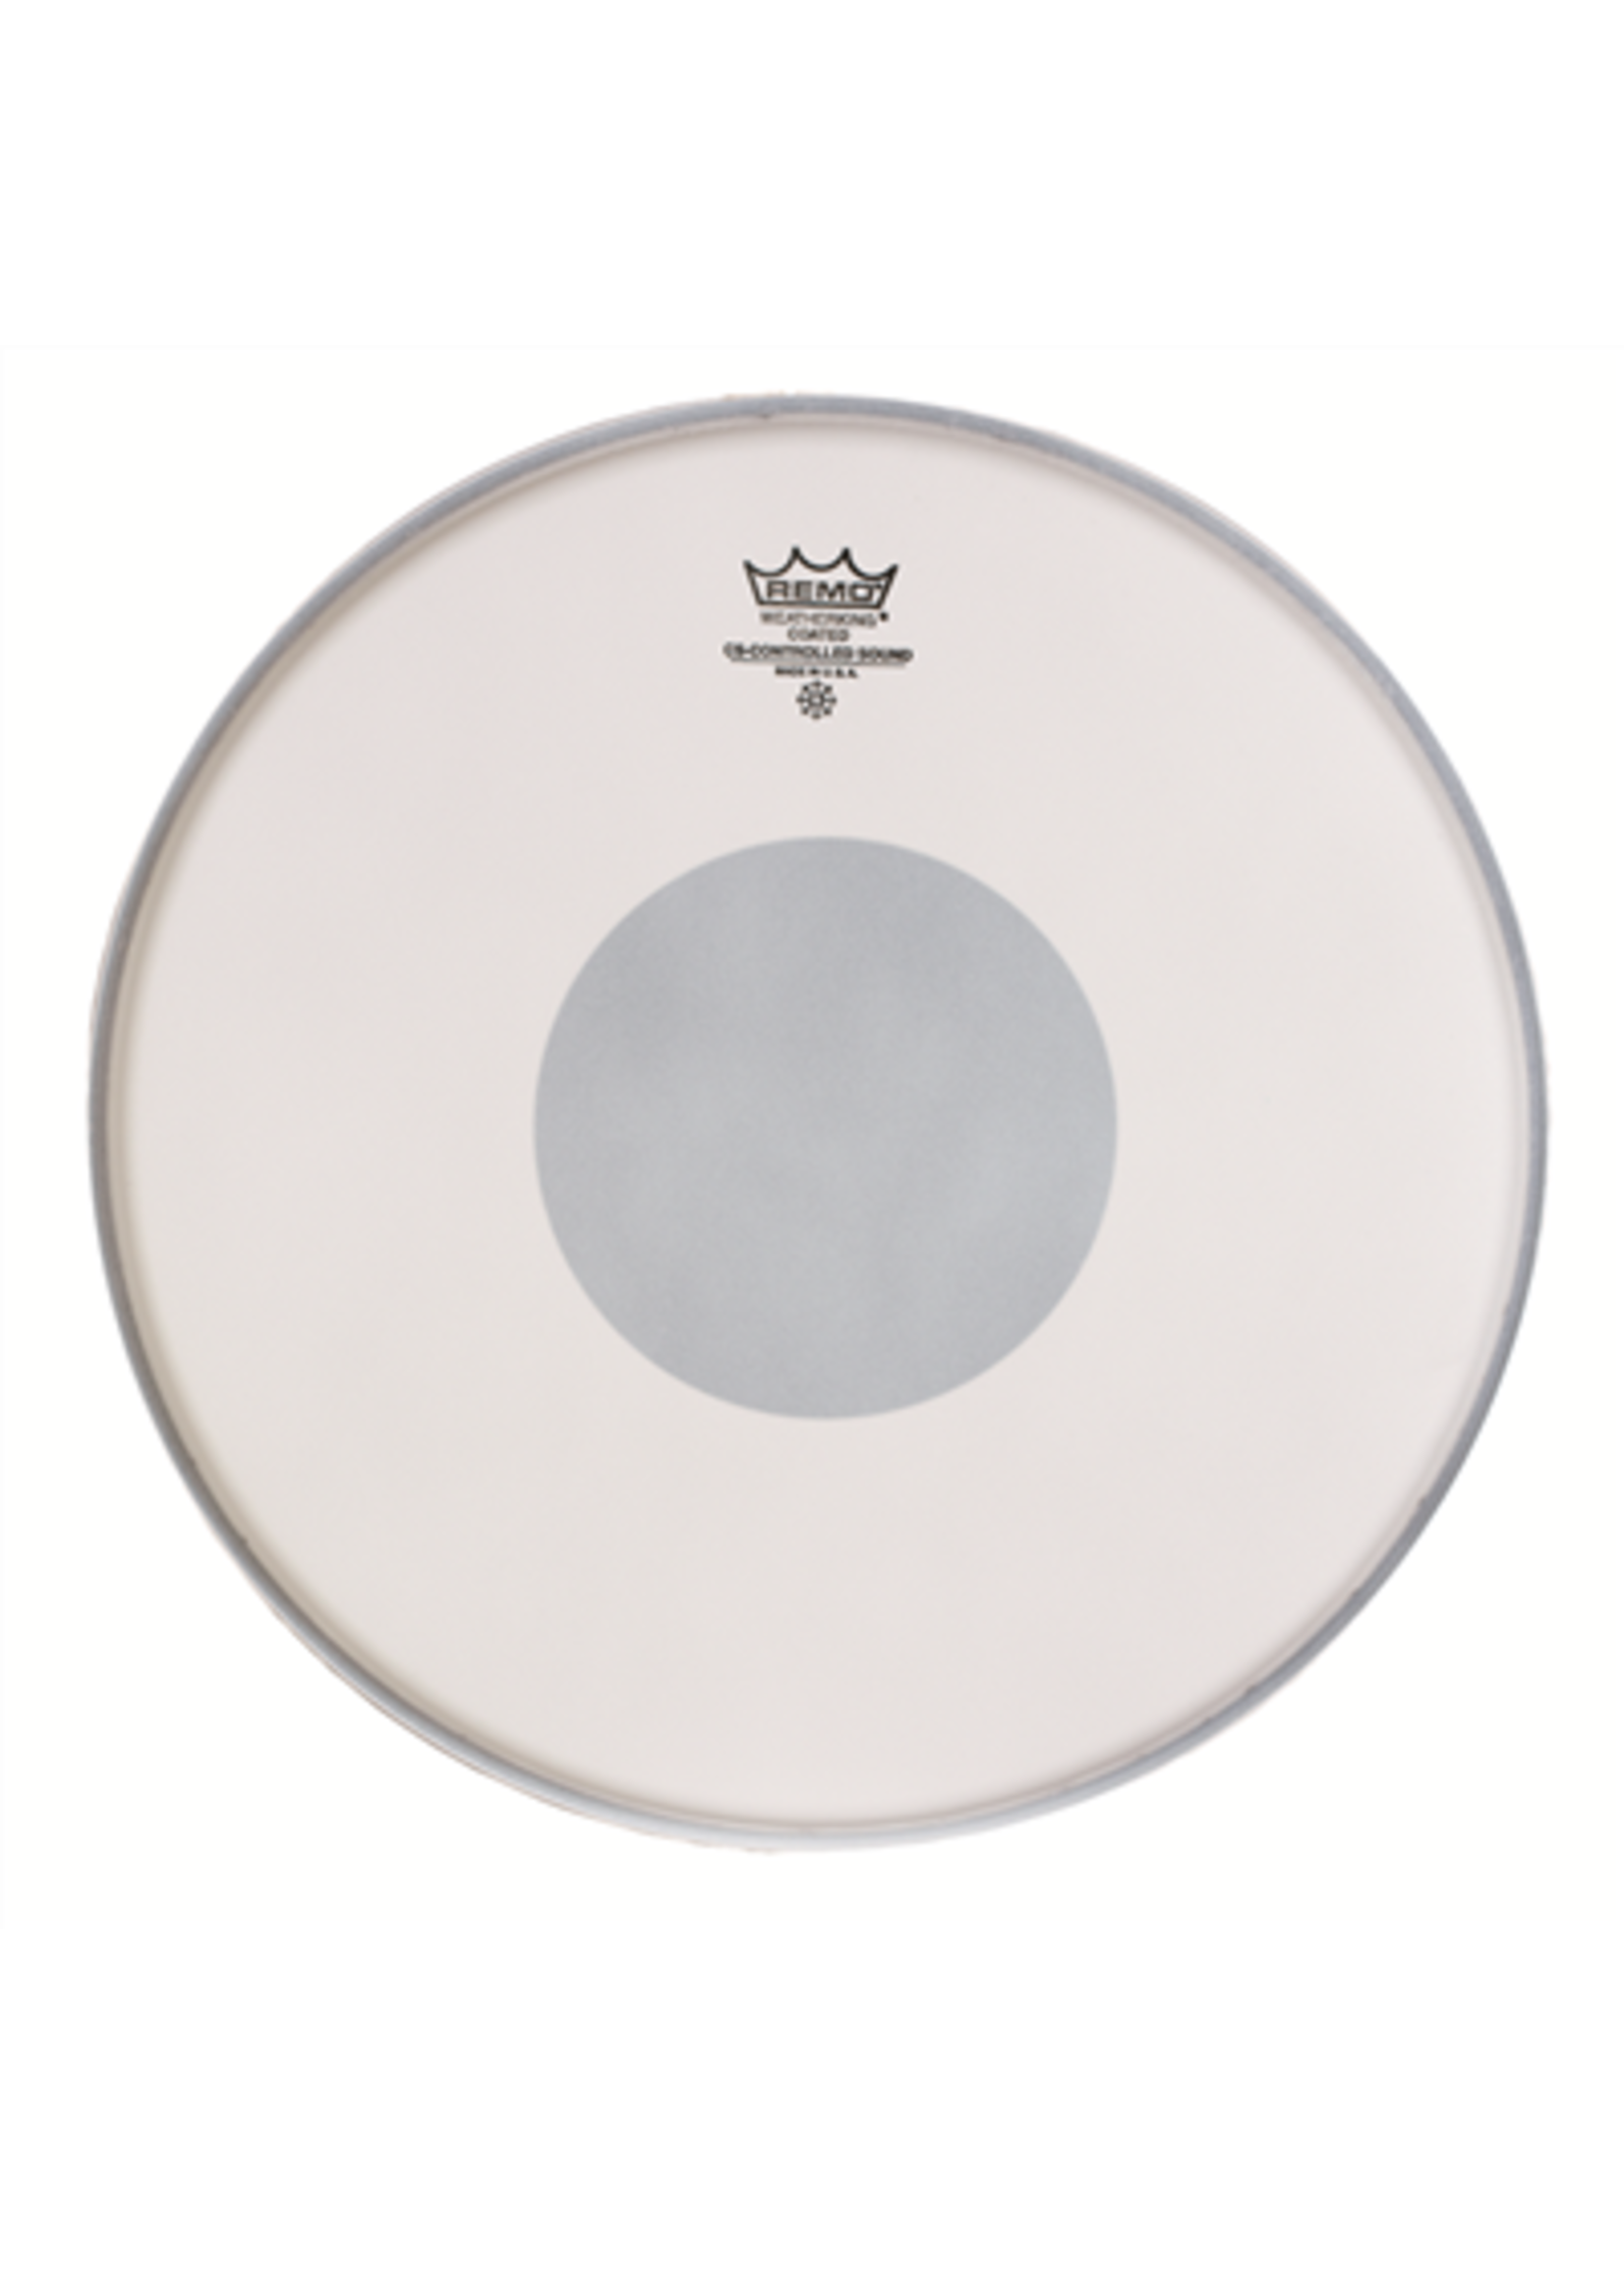 Remo Remo CS-0114-10 Batter, Controlled Sound, Coated, Black Dot on Bottom, 14" Drum Head